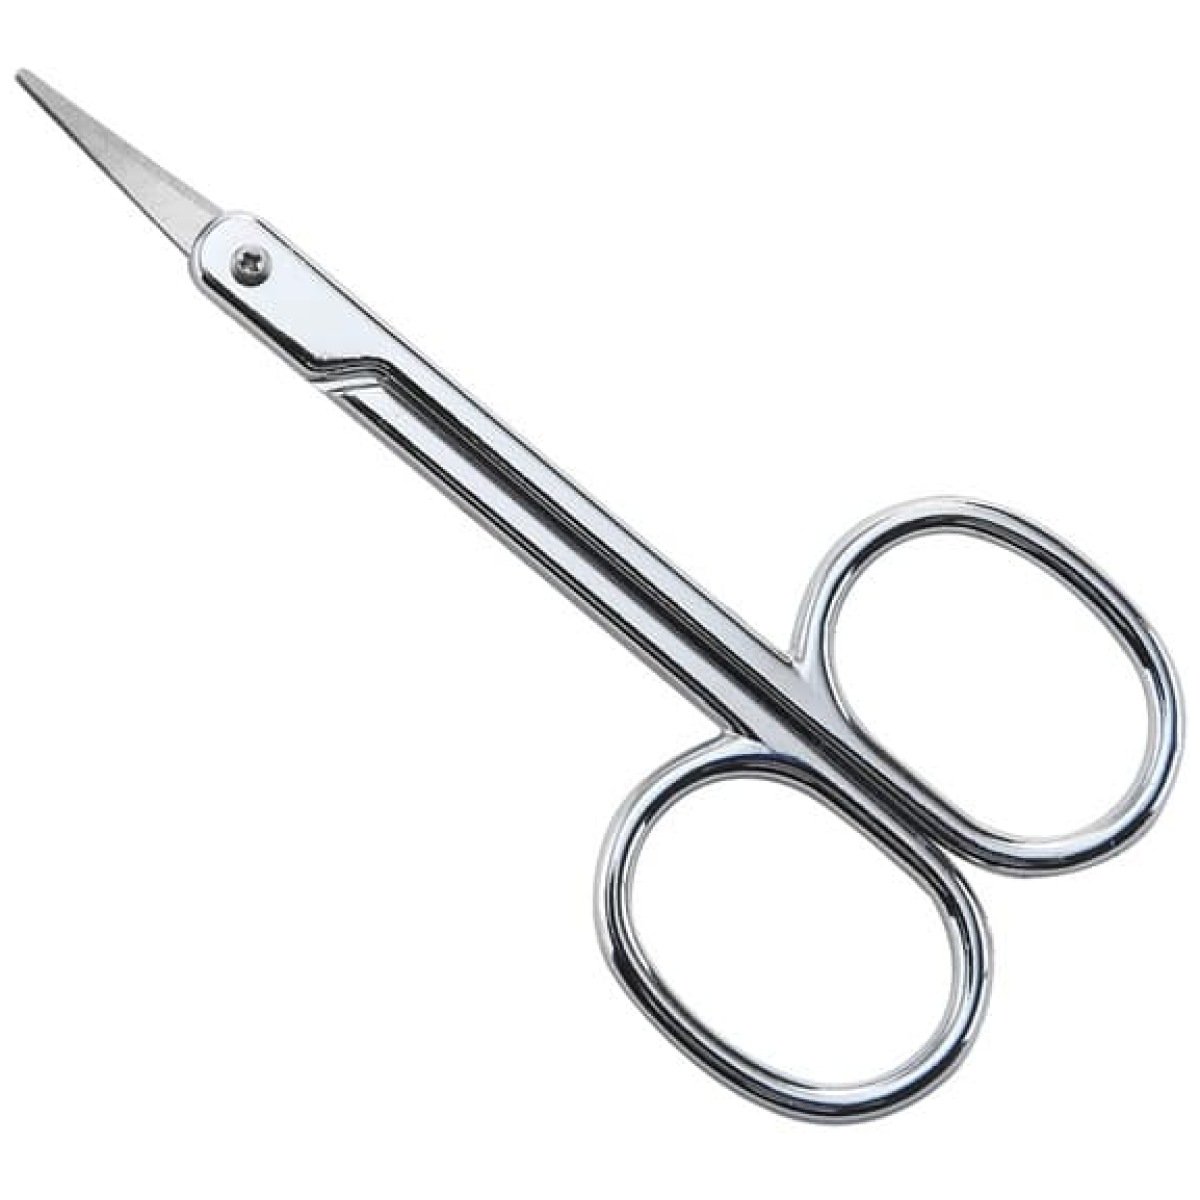 Women's Beauty Tools High Quality Stainless Steel Cusp Small Cosmetic Scissors